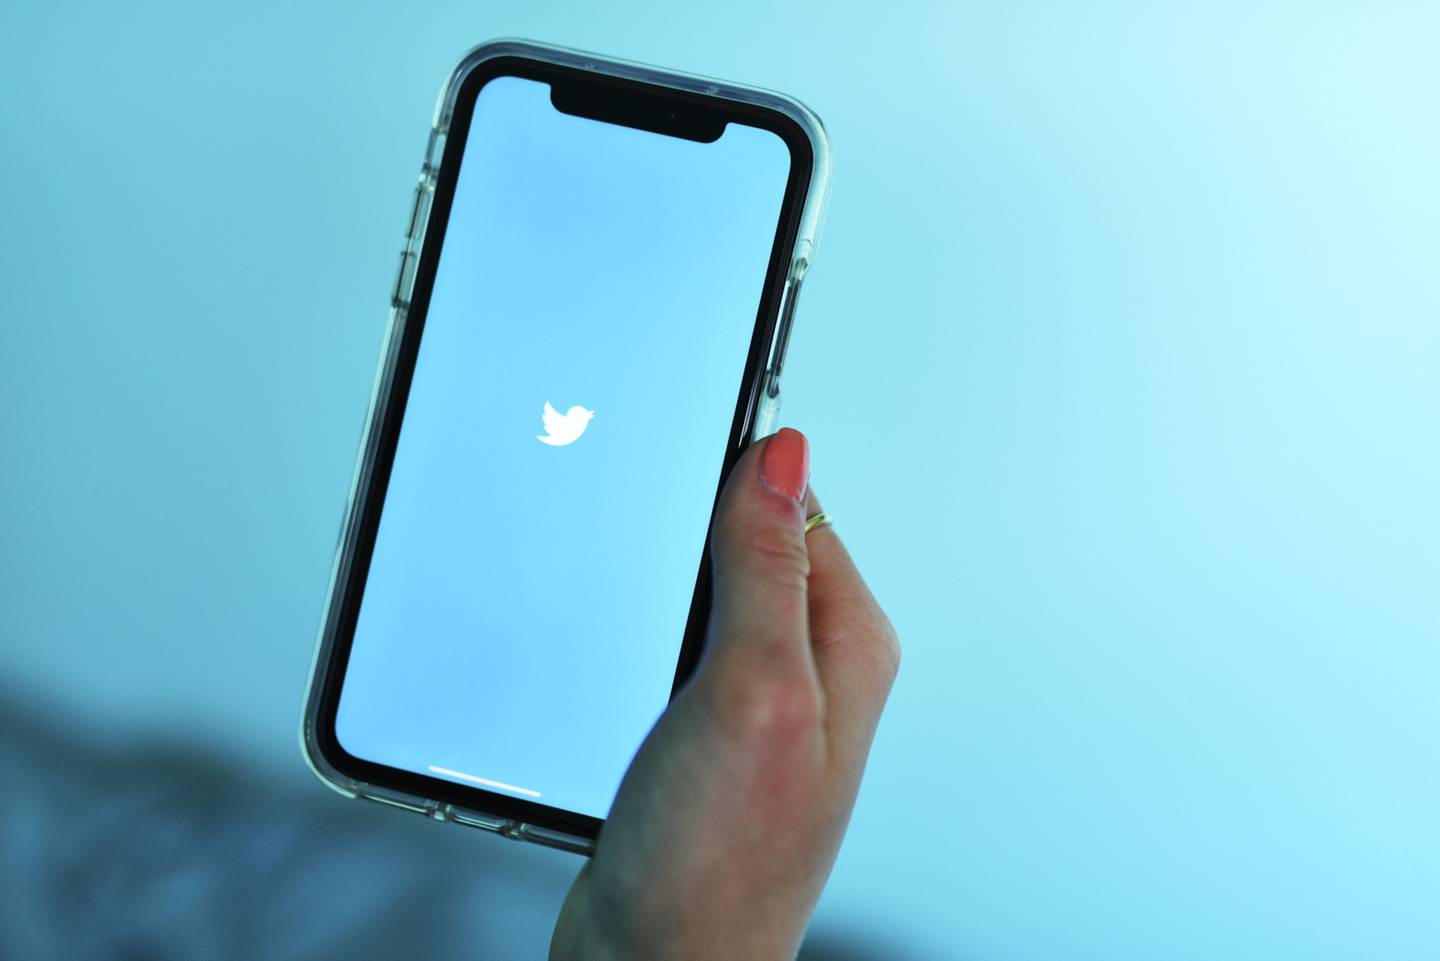 The Twitter application is displayed on an Apple Inc. iPhone in this arranged photograph taken in the Brooklyn borough of New York, U.S., on Saturday, April 20, 2019. Twitter is scheduled to release earnings figures on April 23, 2019. Photographer: Gabby Jones/Bloomberg